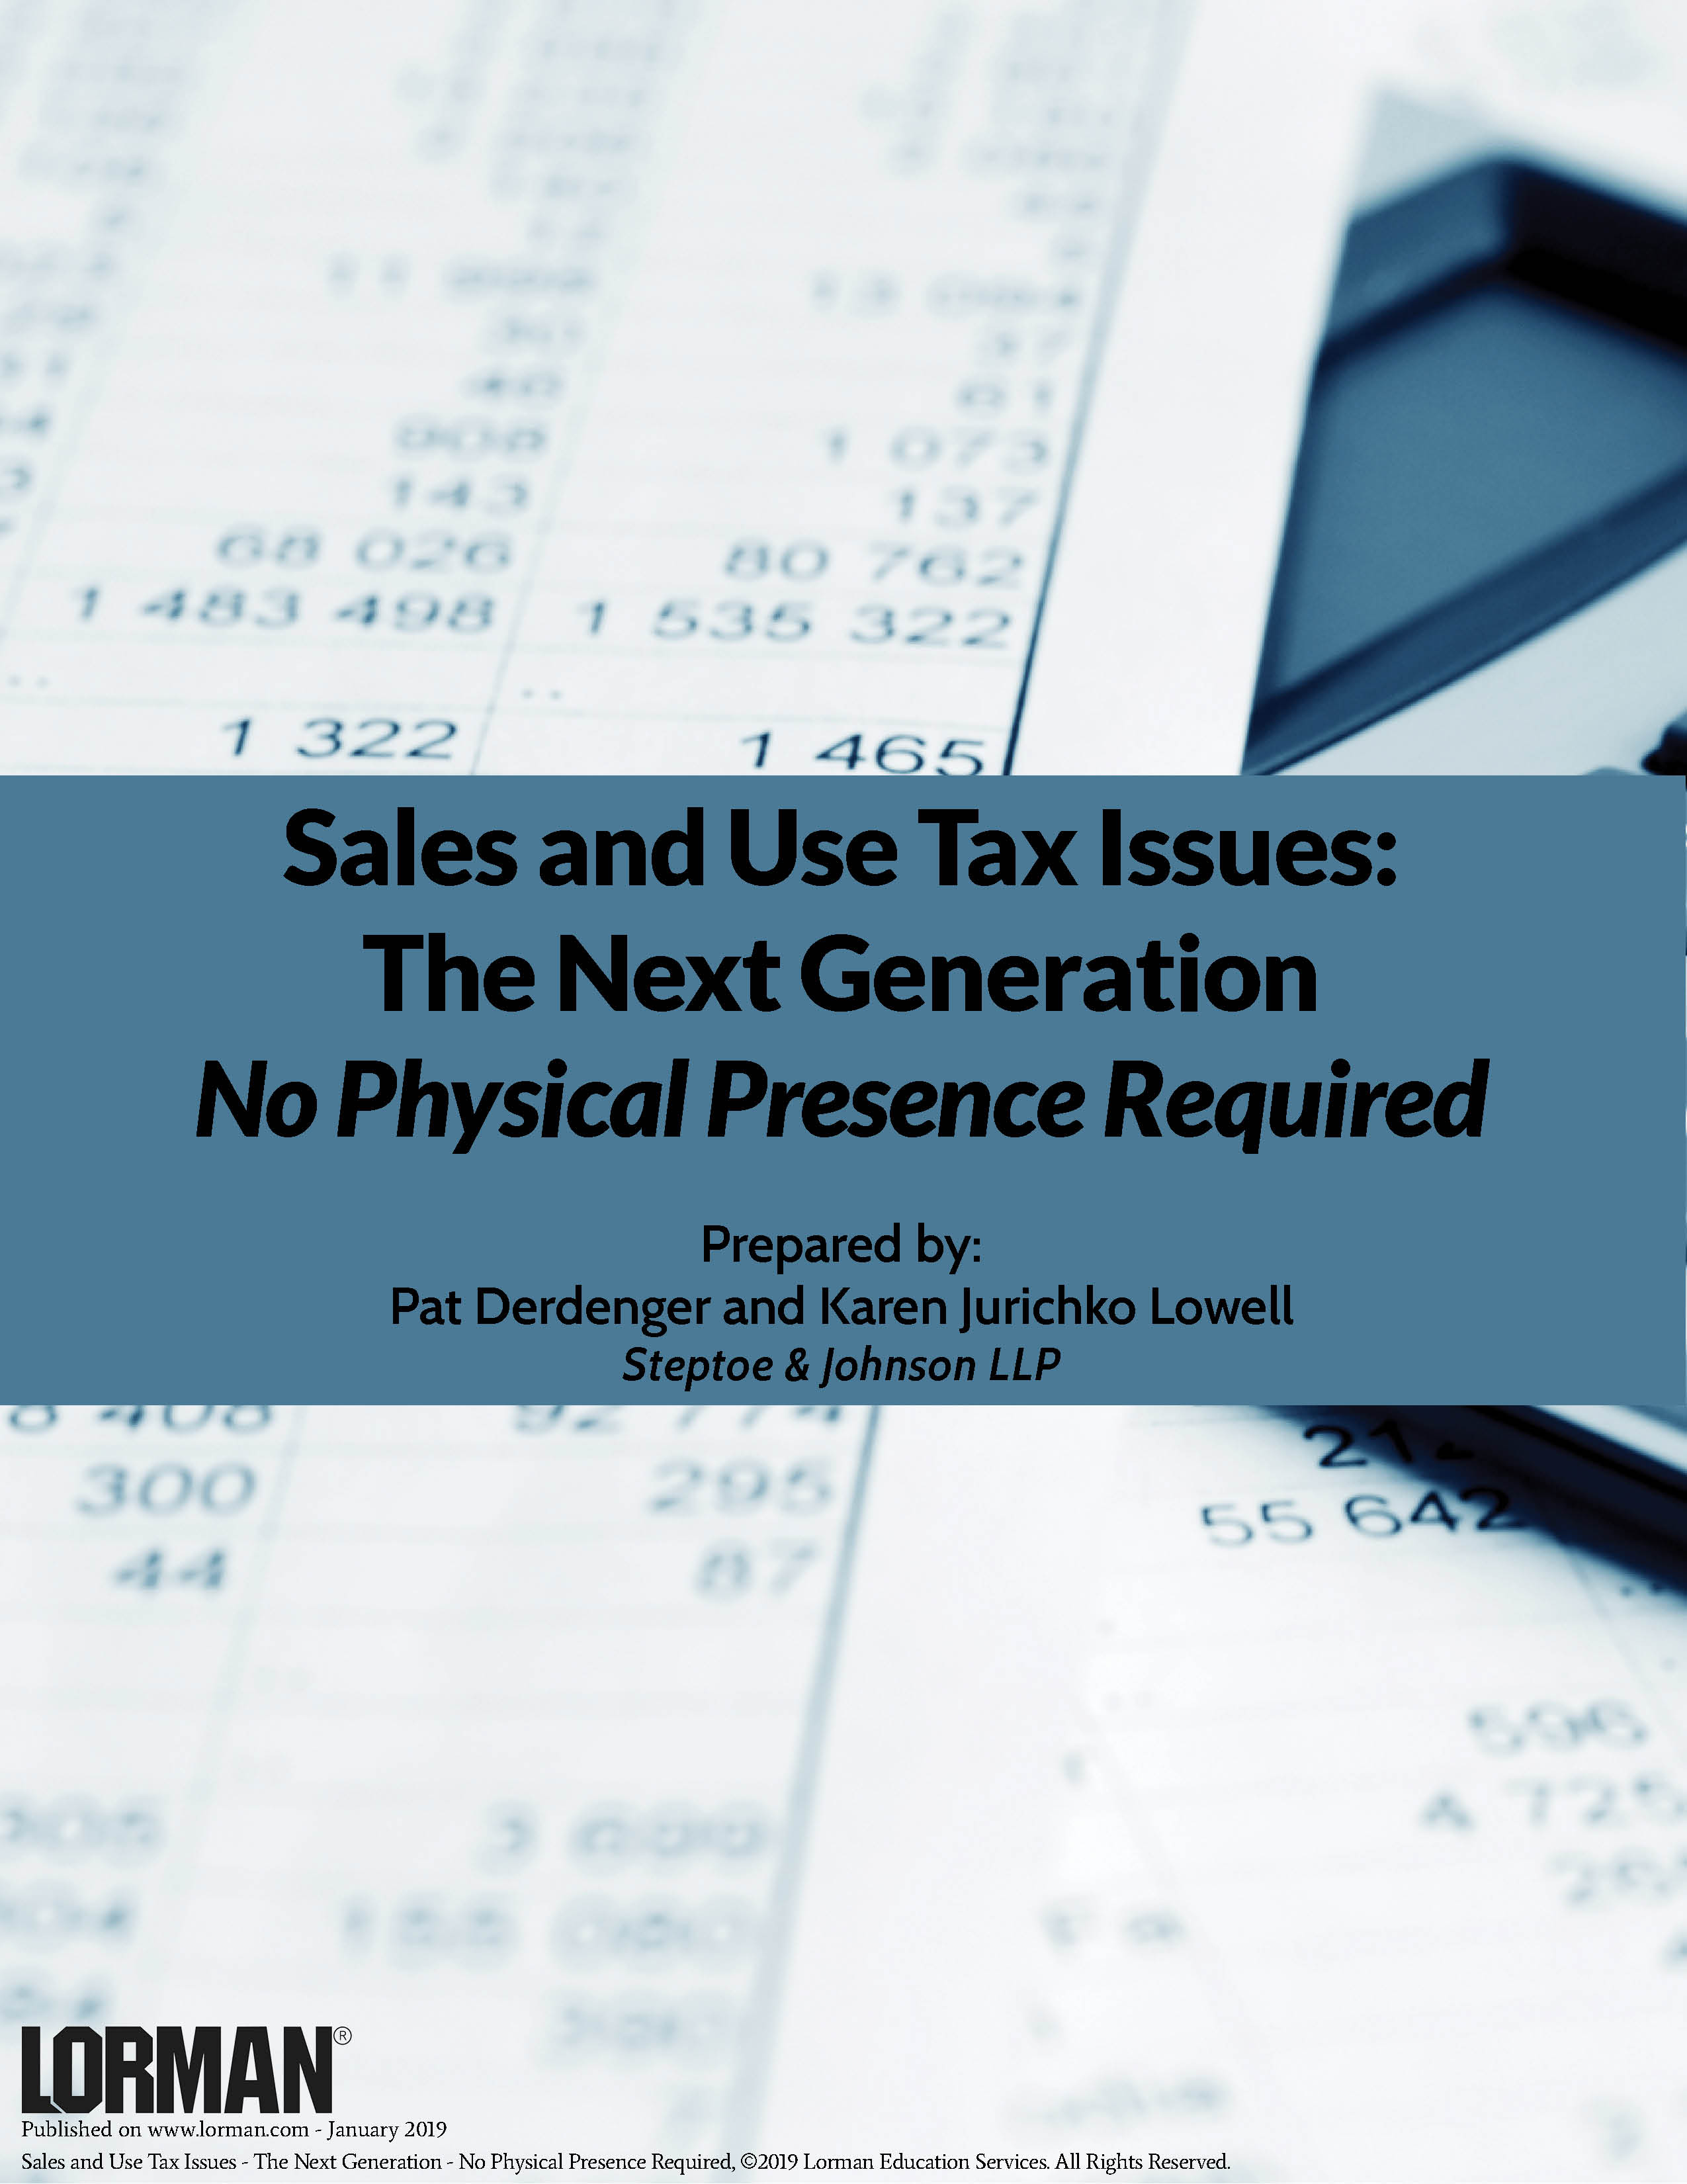 Sales and Use Tax Issues - The Next Generation - No Physical Presence Required